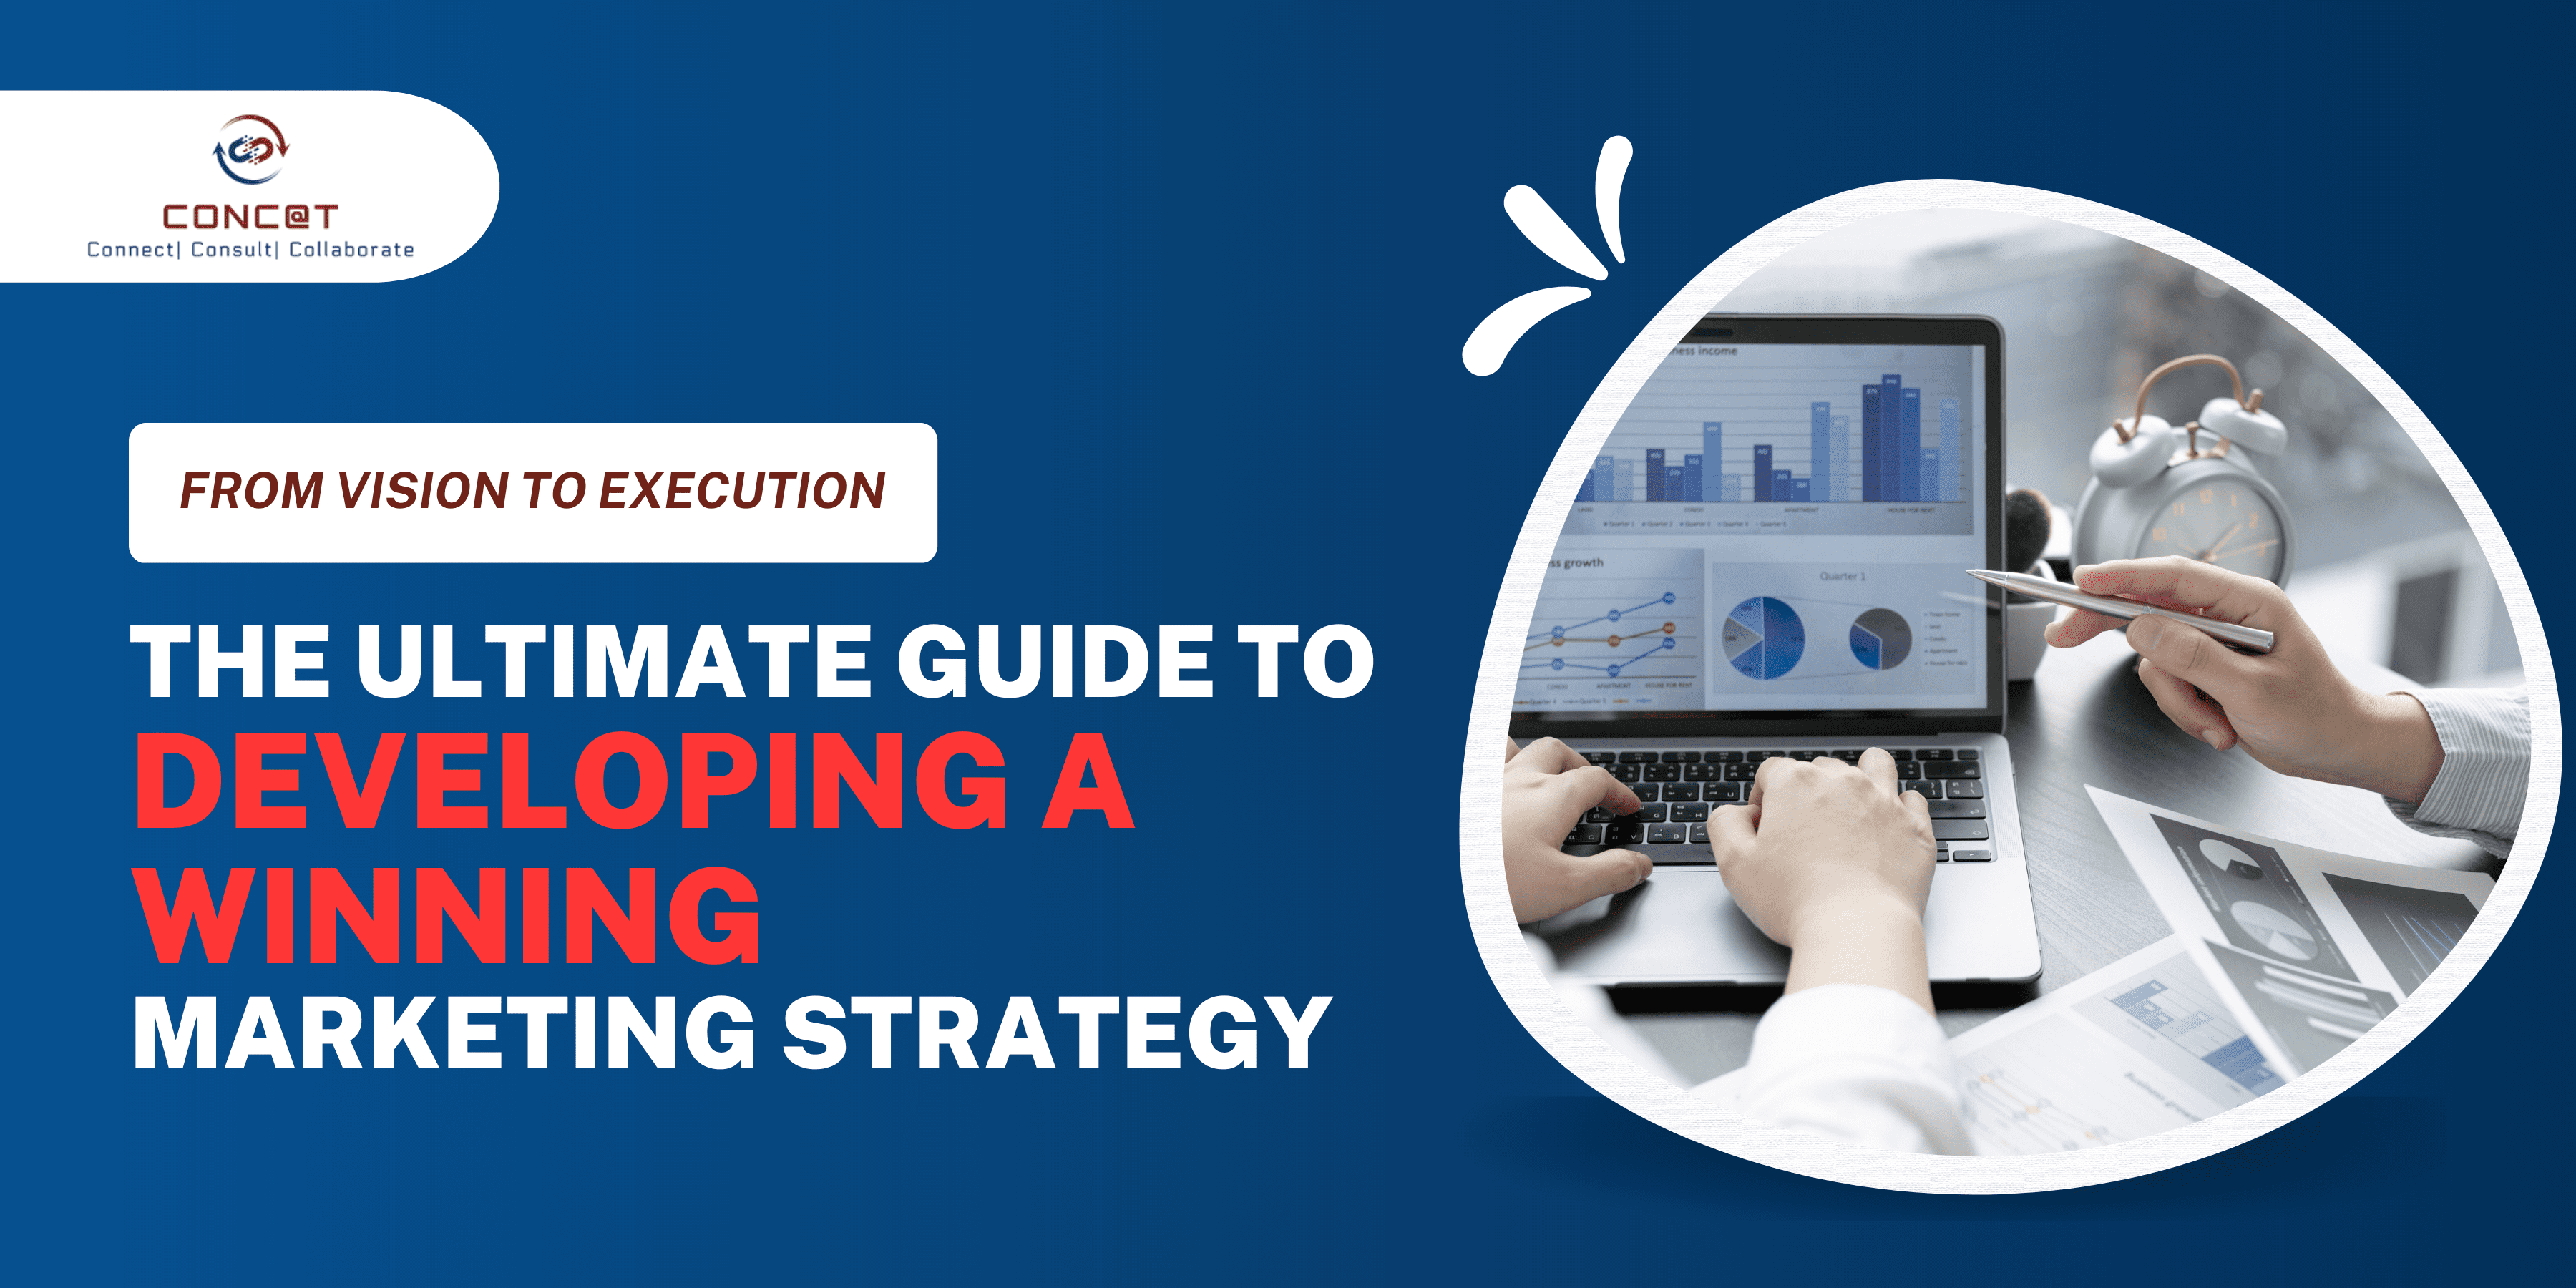 From Vision to Execution: The Ultimate Guide to Developing a Winning Marketing Strategy